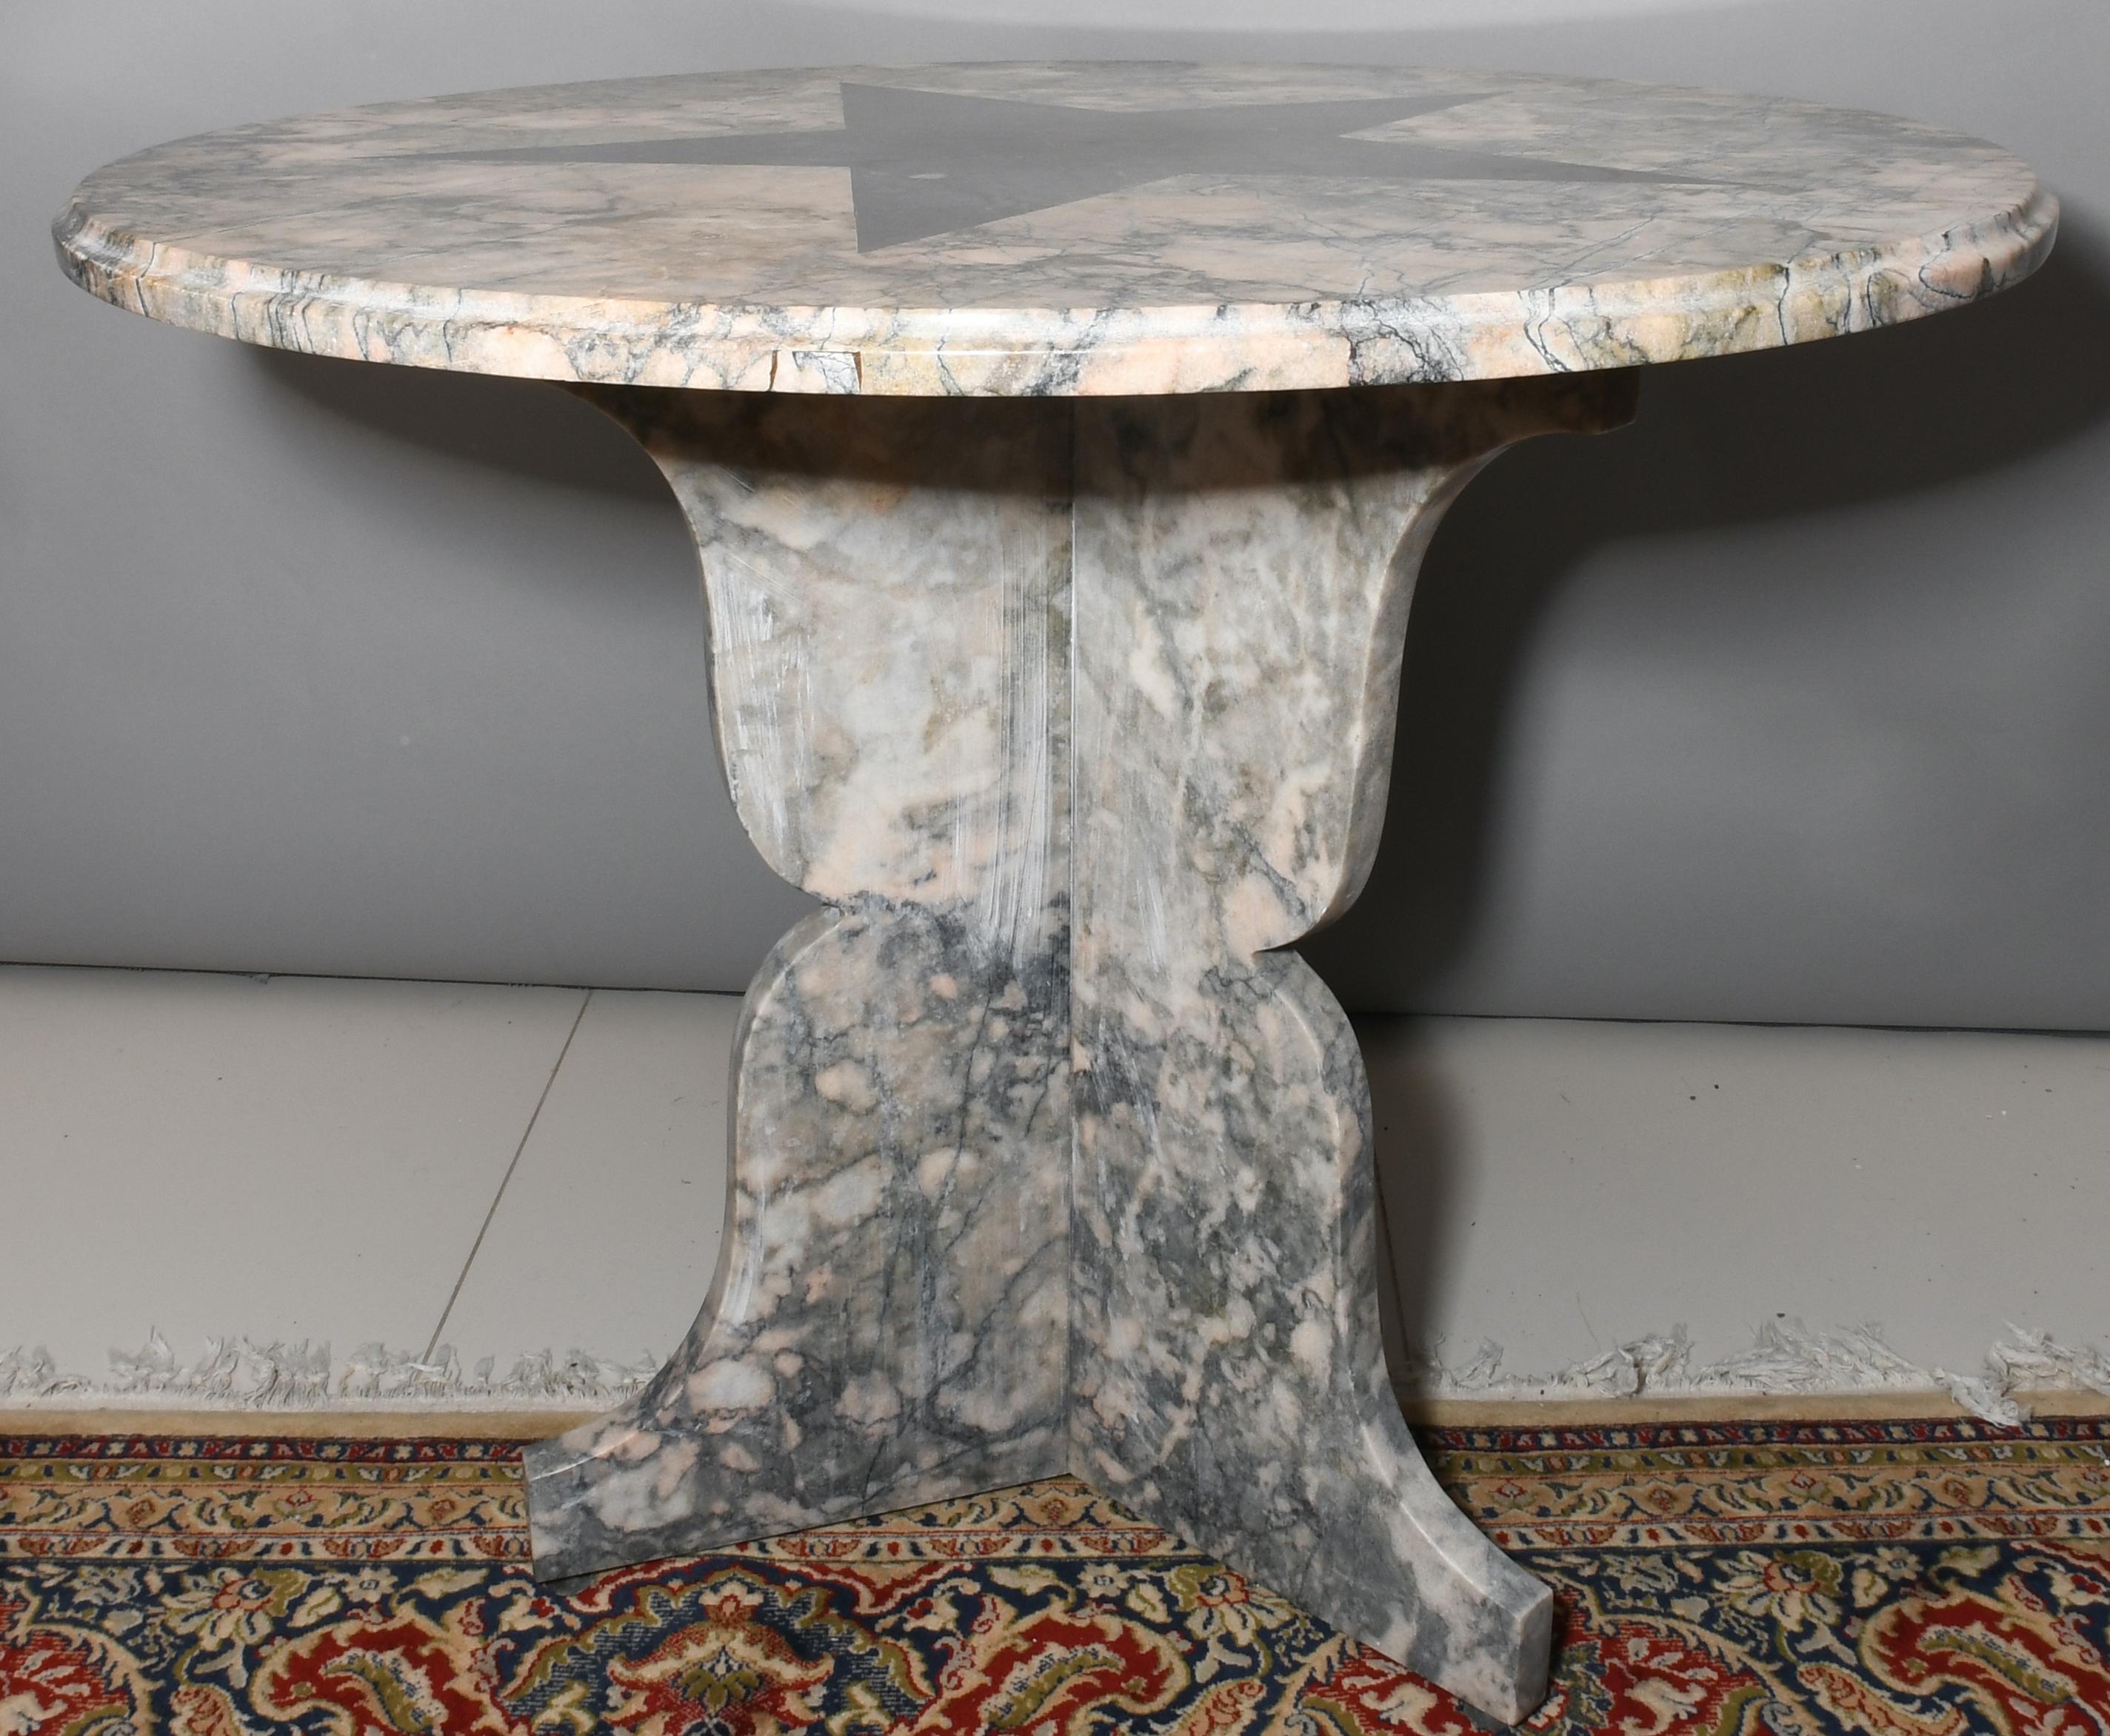 A Calacatta pink marble center table made in the 1970s with a black large five pointed star design at the top of it. The star- the North star - symbolizes a beacon of inspiration, hope, and direction. The tripod base of the table is also made of